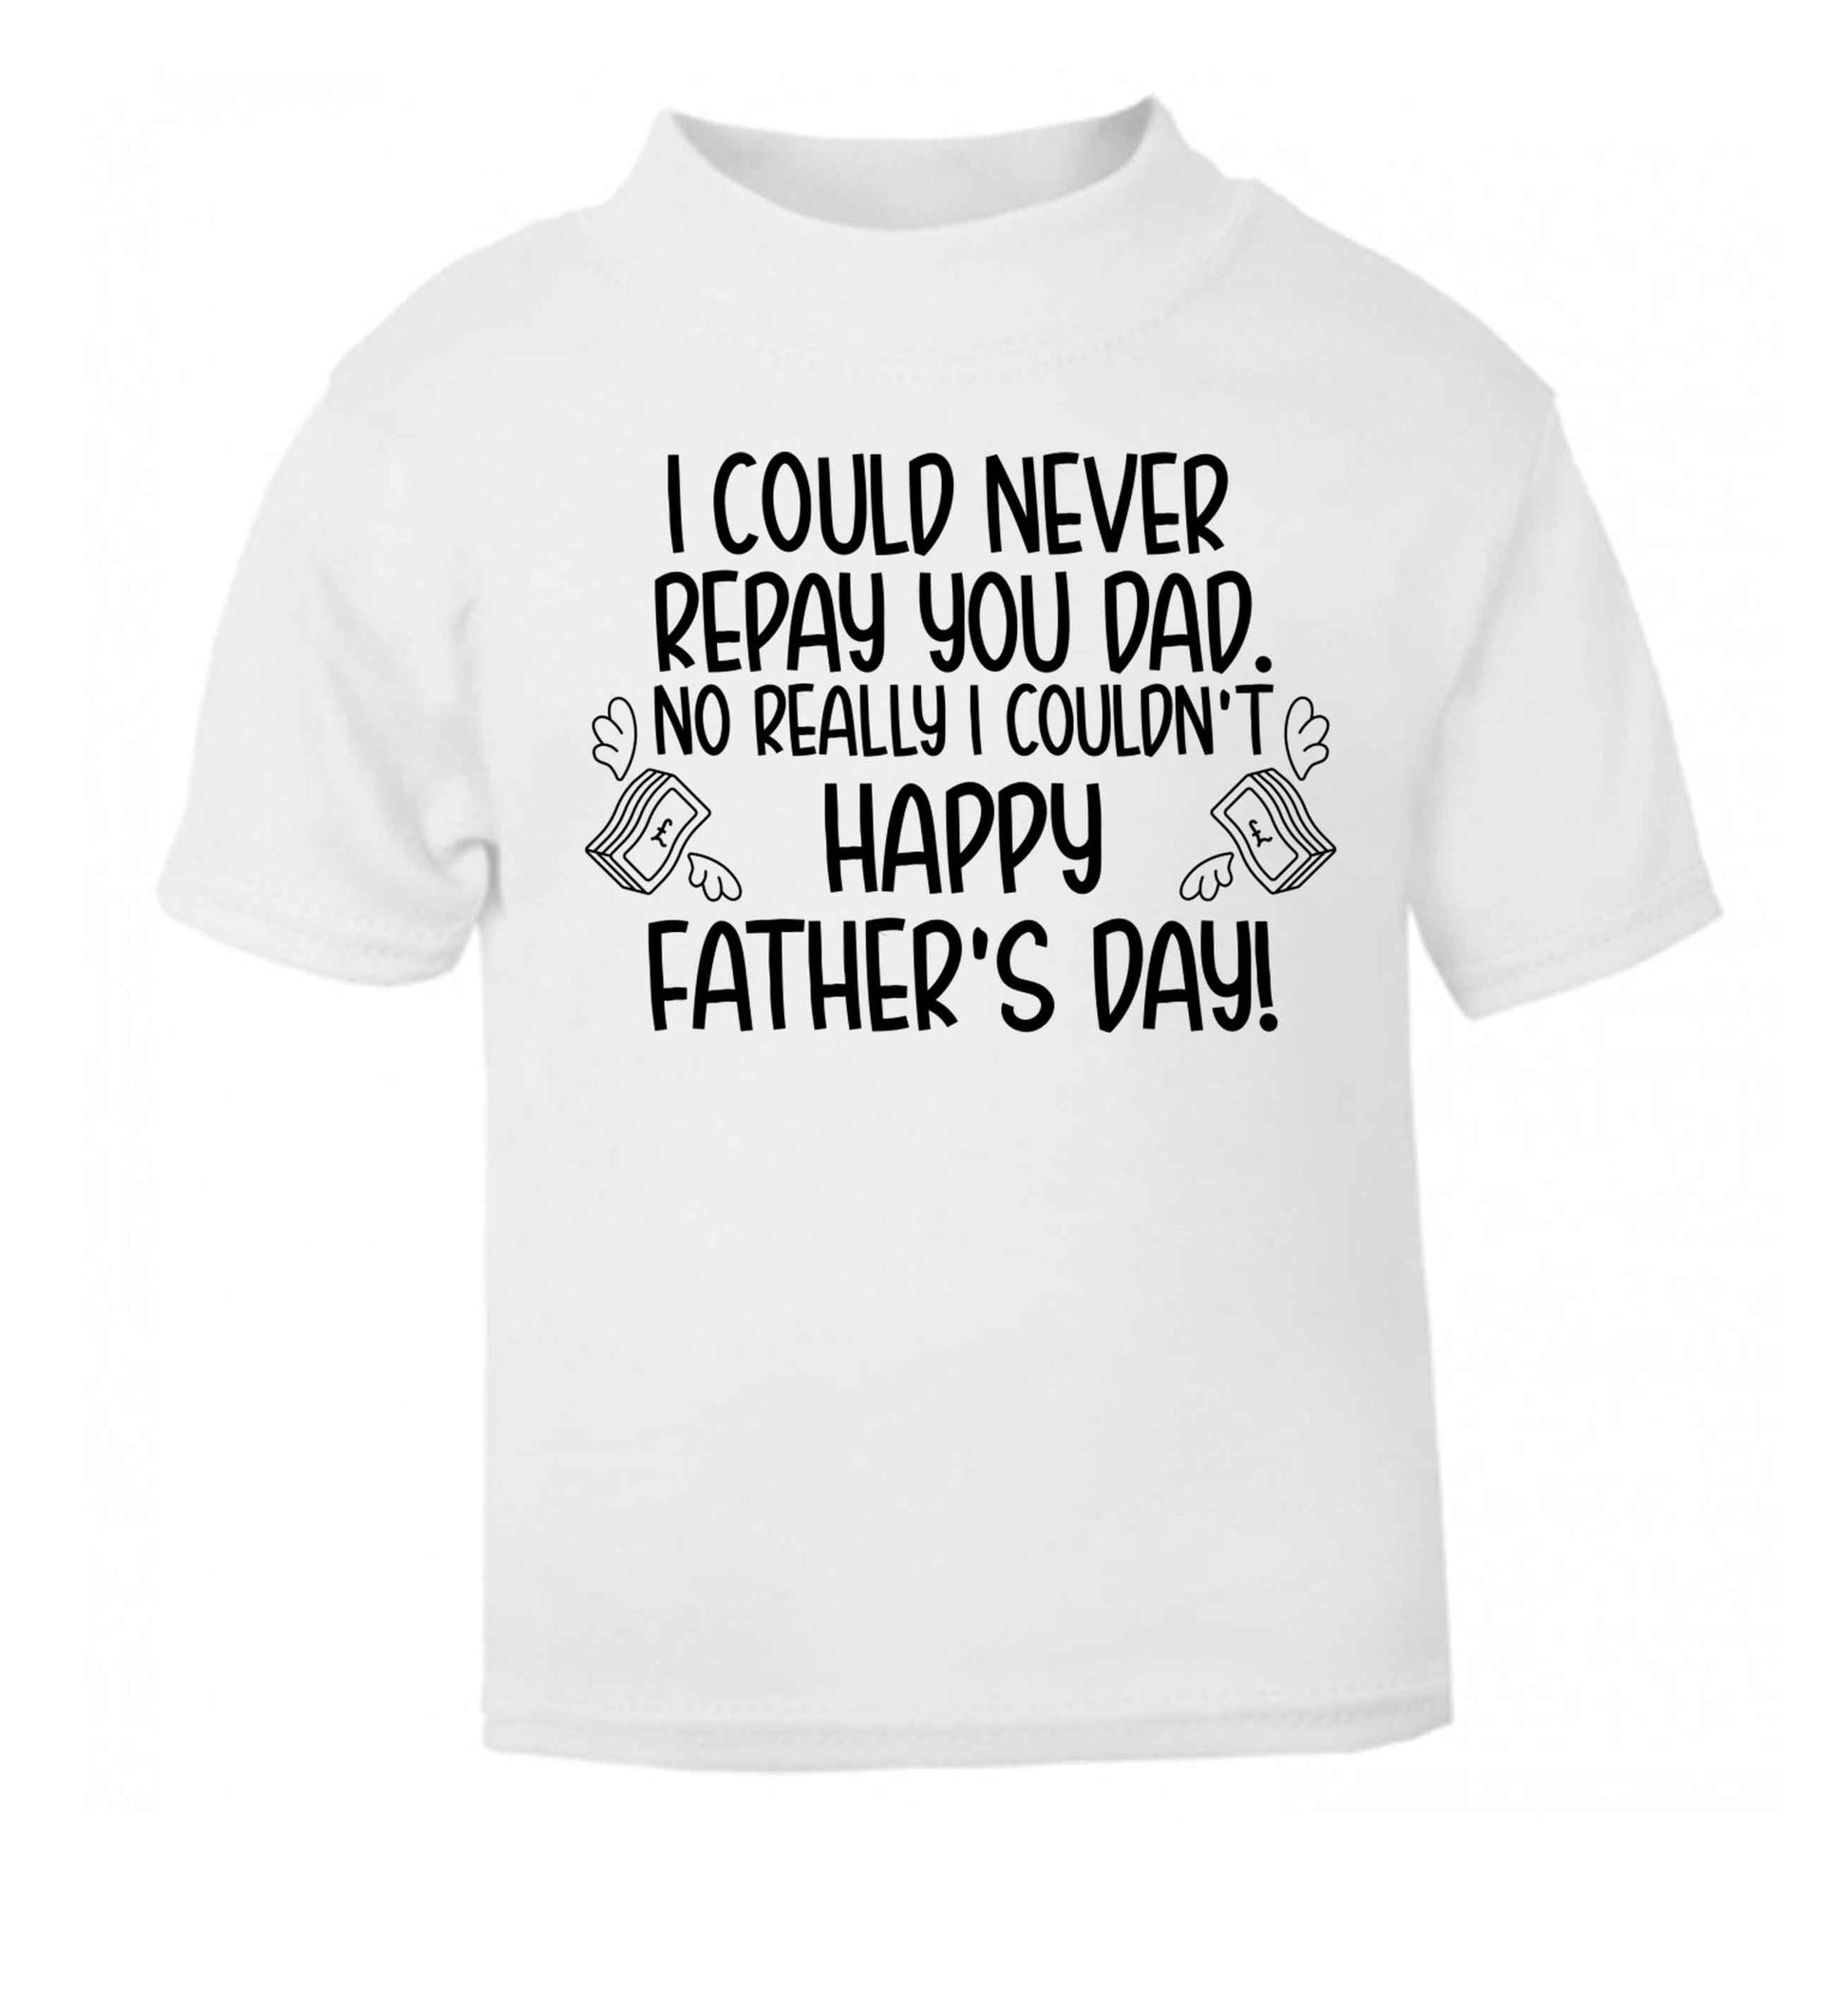 I could never repay you dad. No I really couldn't happy Father's day! white baby toddler Tshirt 2 Years